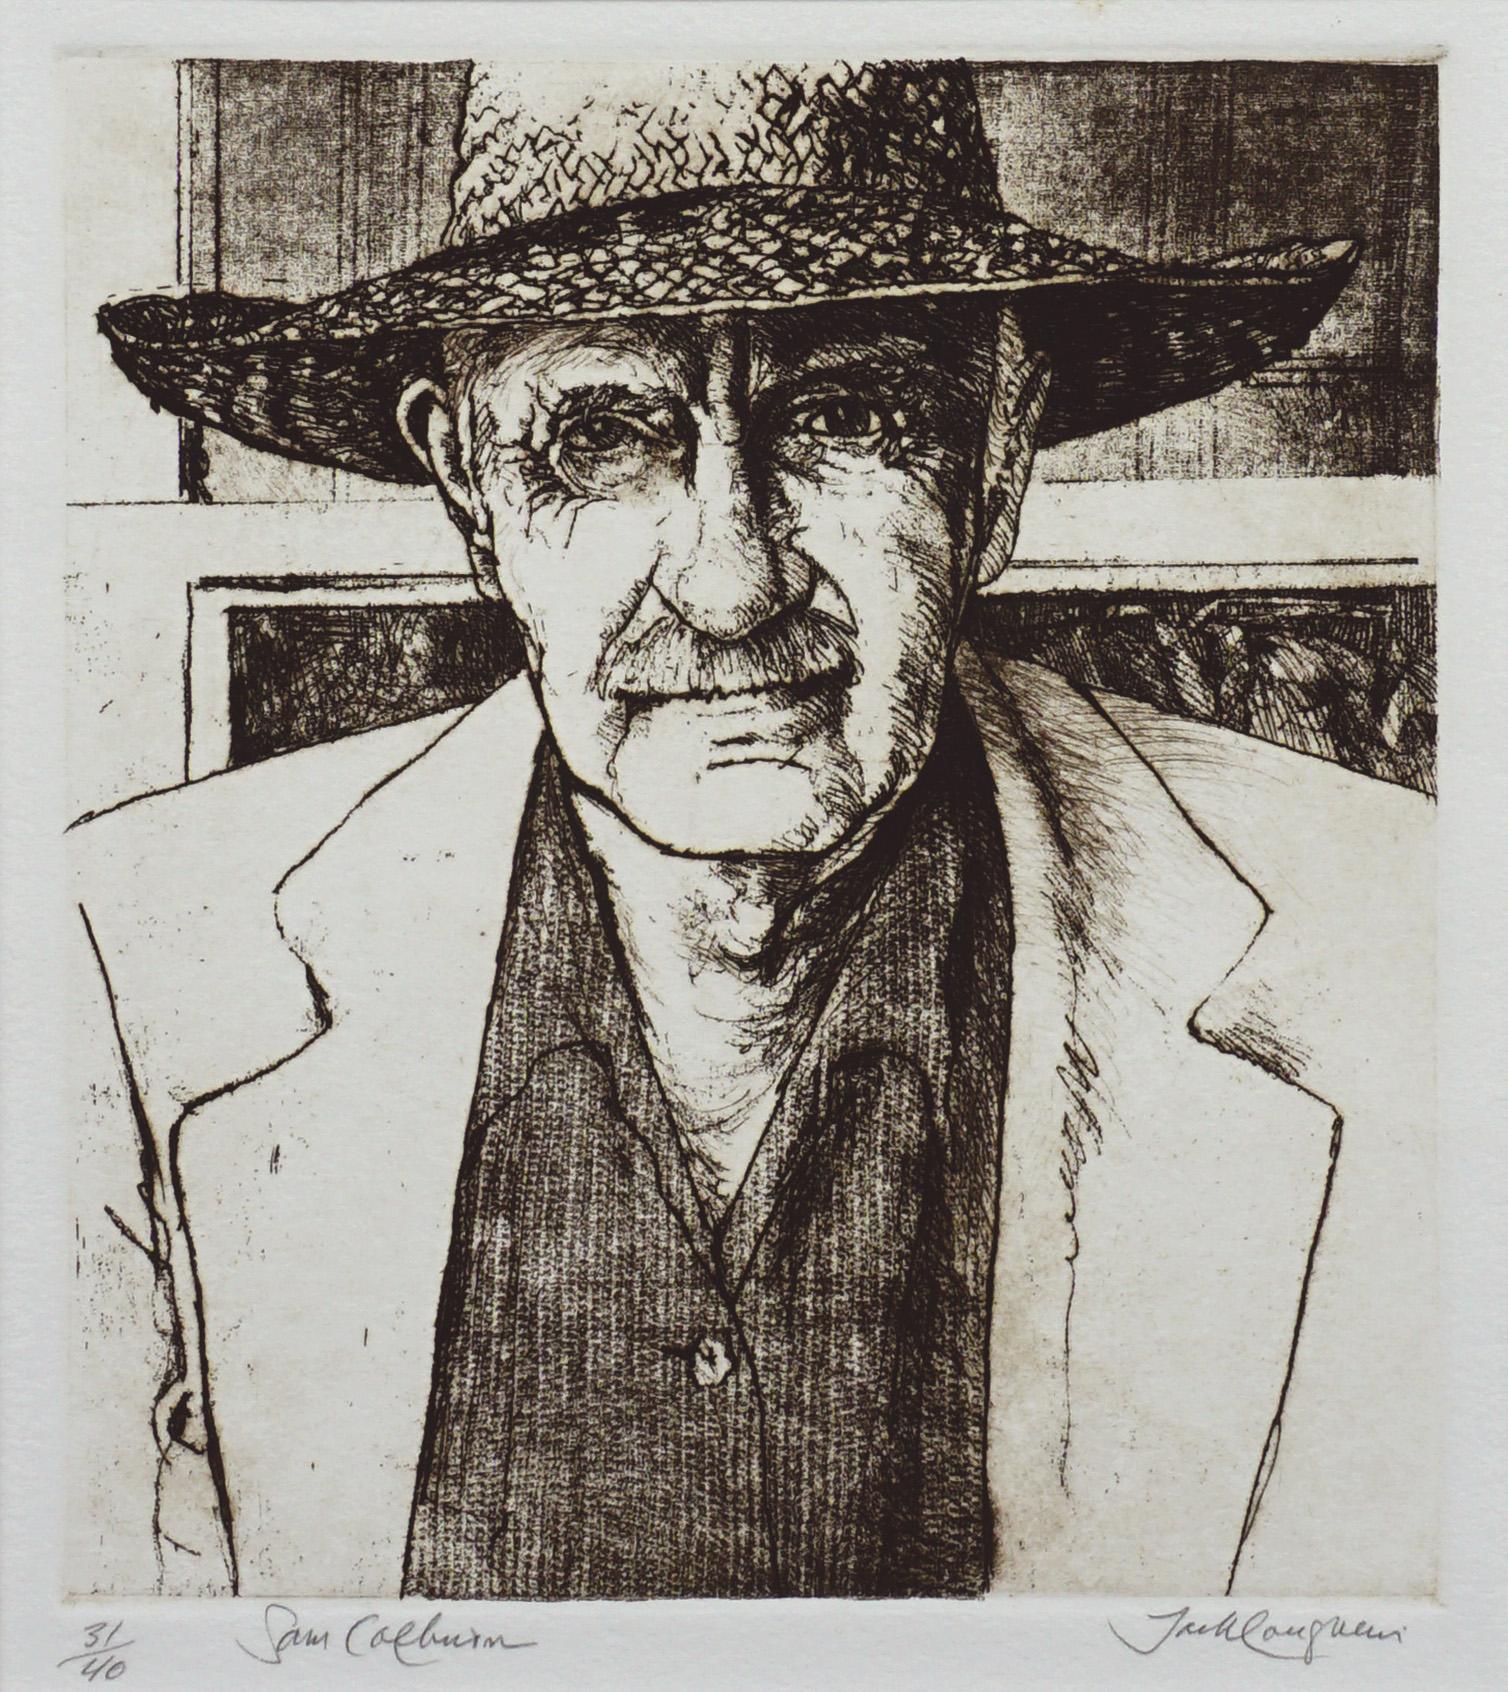 Sam Colburn Carmel Artist Portrait, Signed Limited Edition Realist Lithograph  - Print by Jack Coughlin